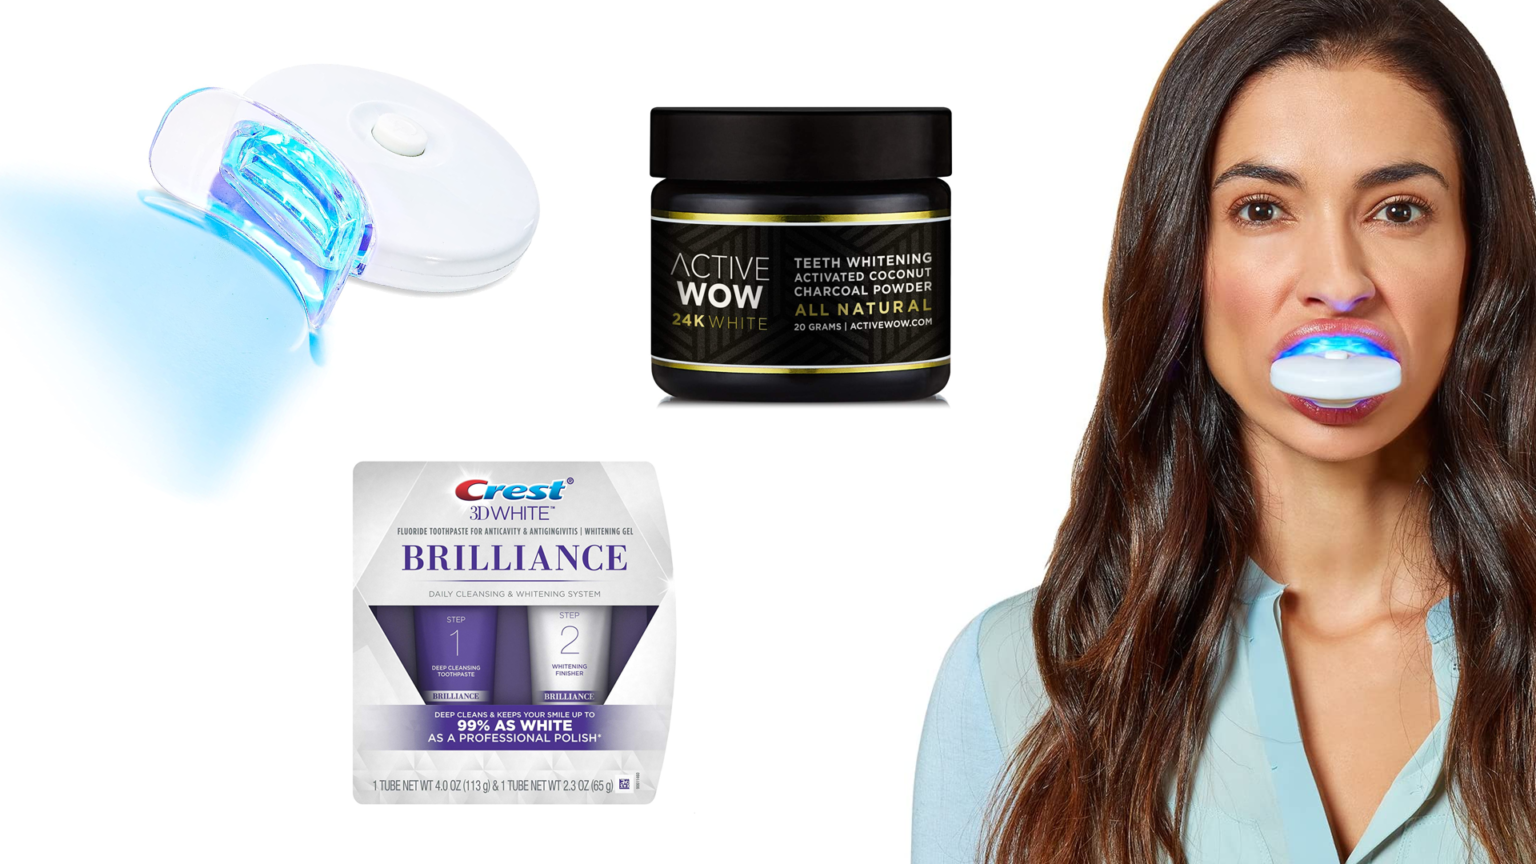 Top 10 Best Teeth Whitening Kit: 2020 Reviews and Buying Guide